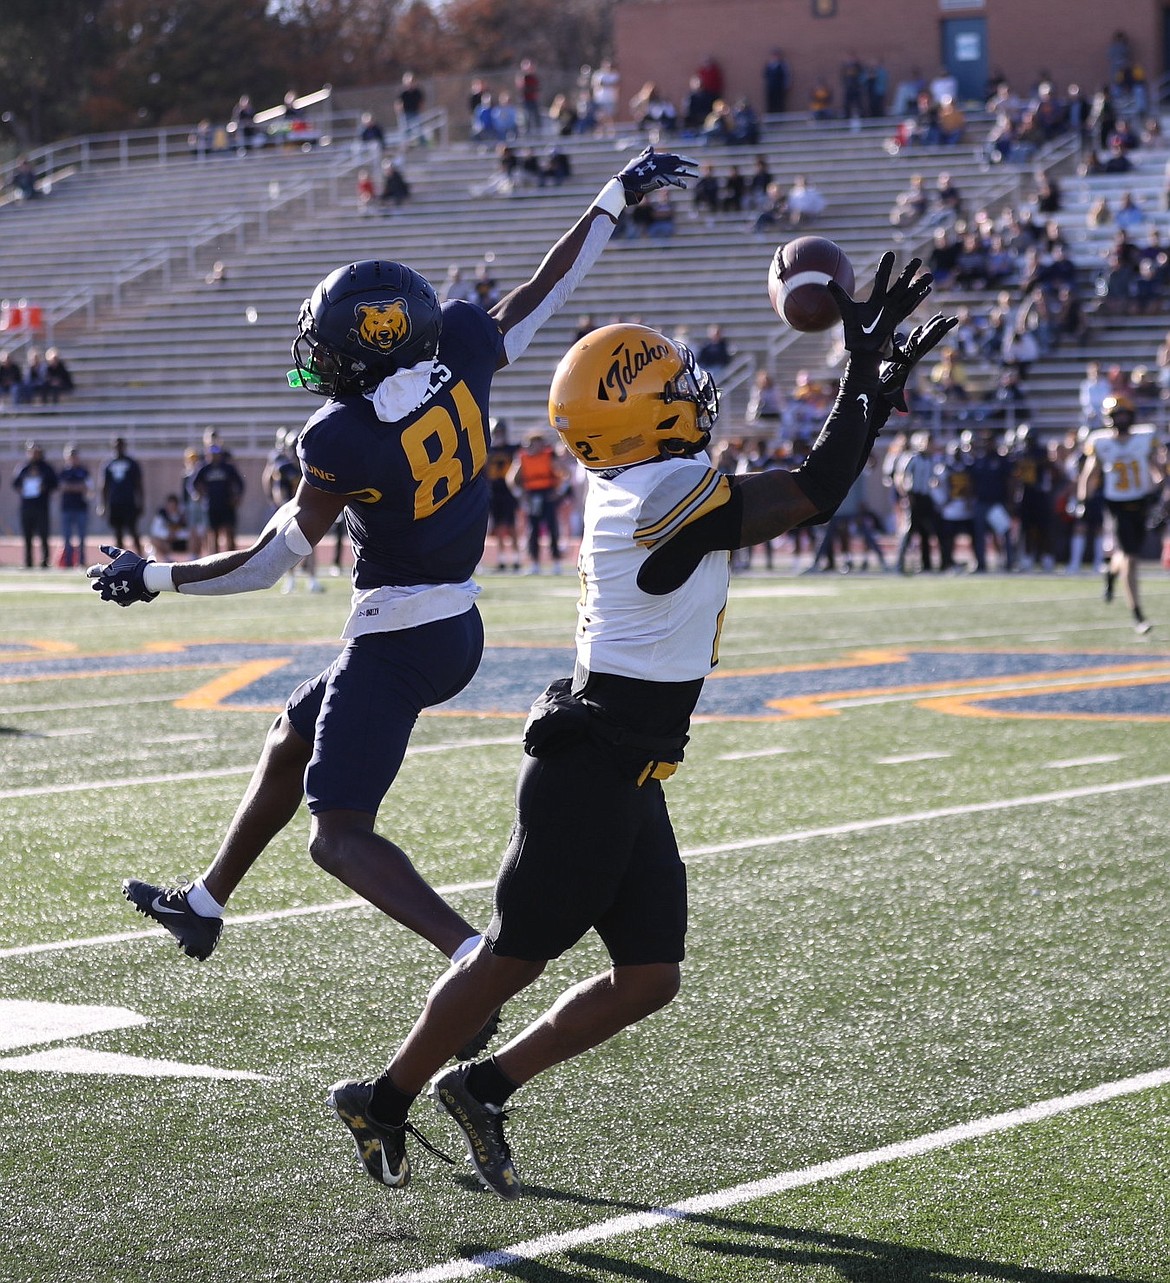 Photo by IDAHO ATHLETICS
Marcus Harris of Idaho intercepts a pass intended for Jordan Riles (81) of Northern Colorado in the fourth quarter Saturday in Greeley, Colo.